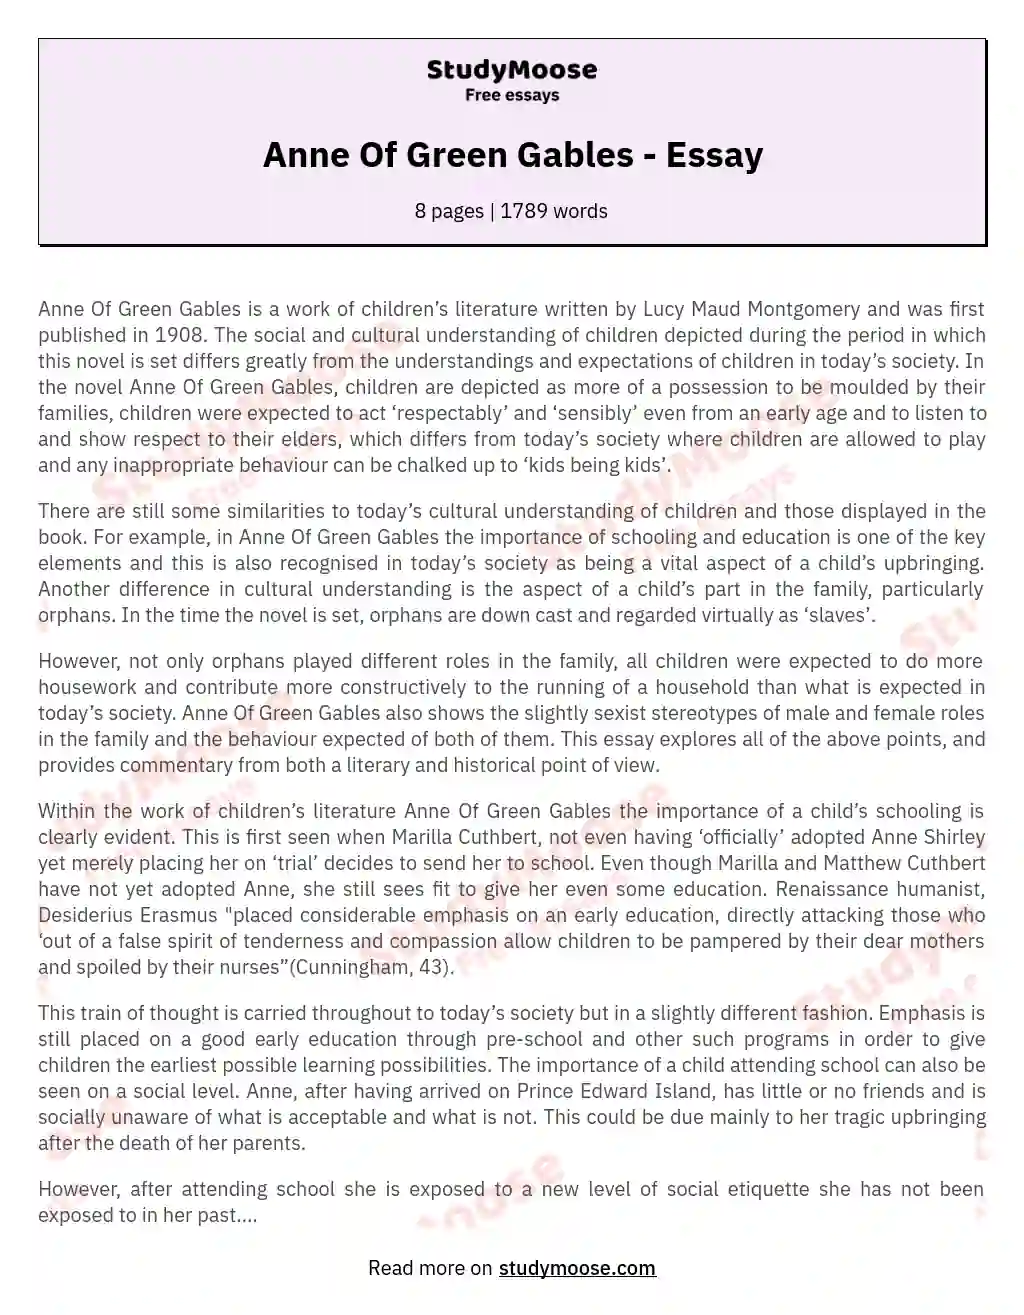 Anne Of Green Gables - Essay essay